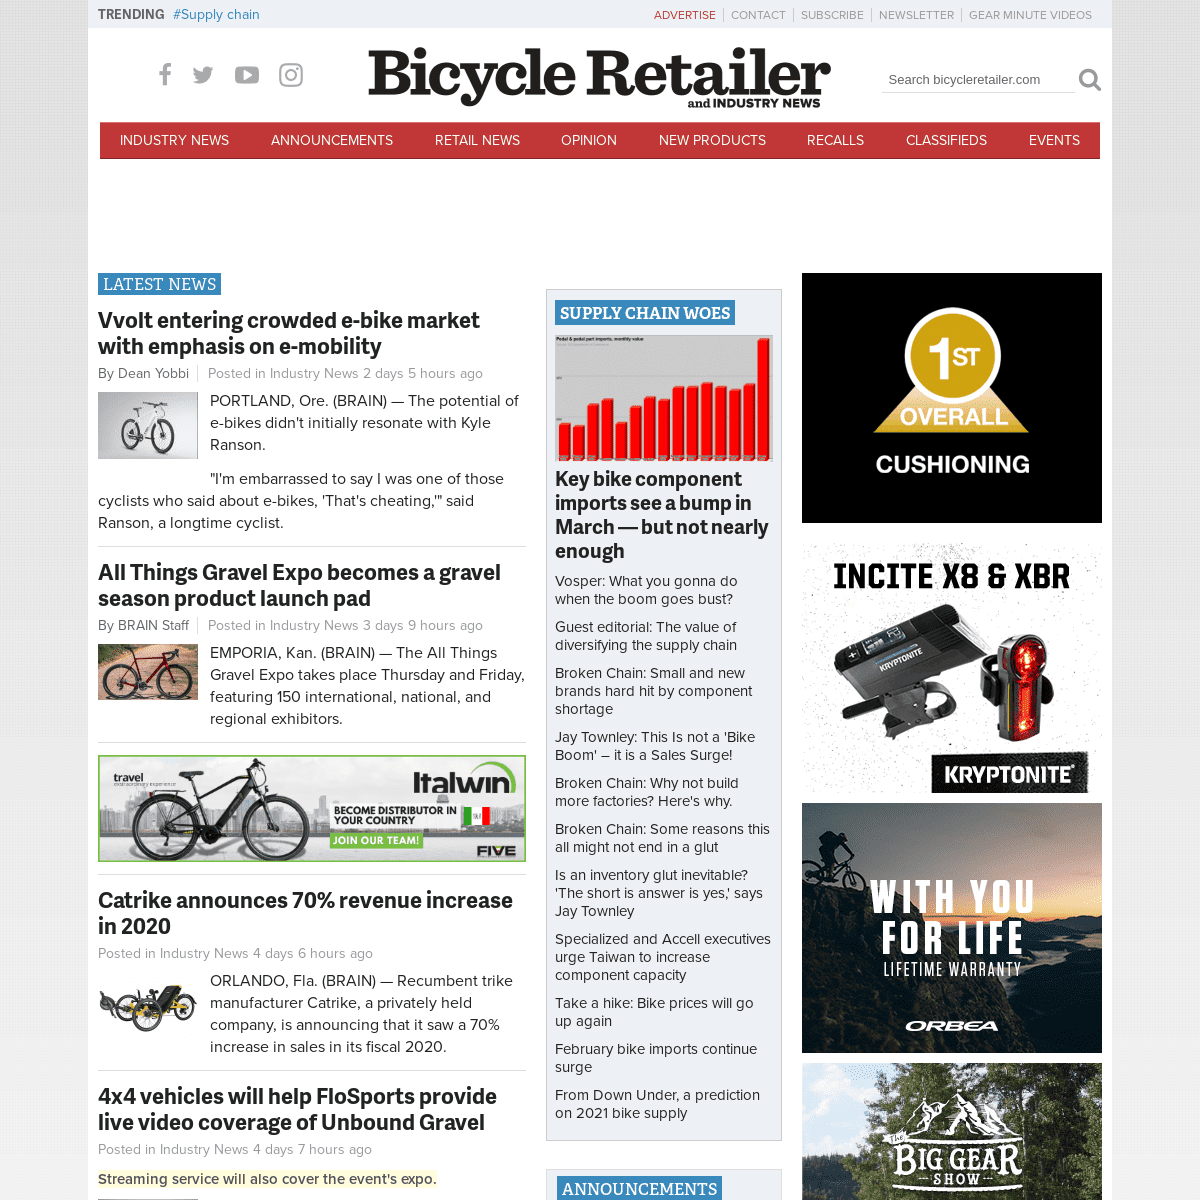 A complete backup of https://bicycleretailer.com